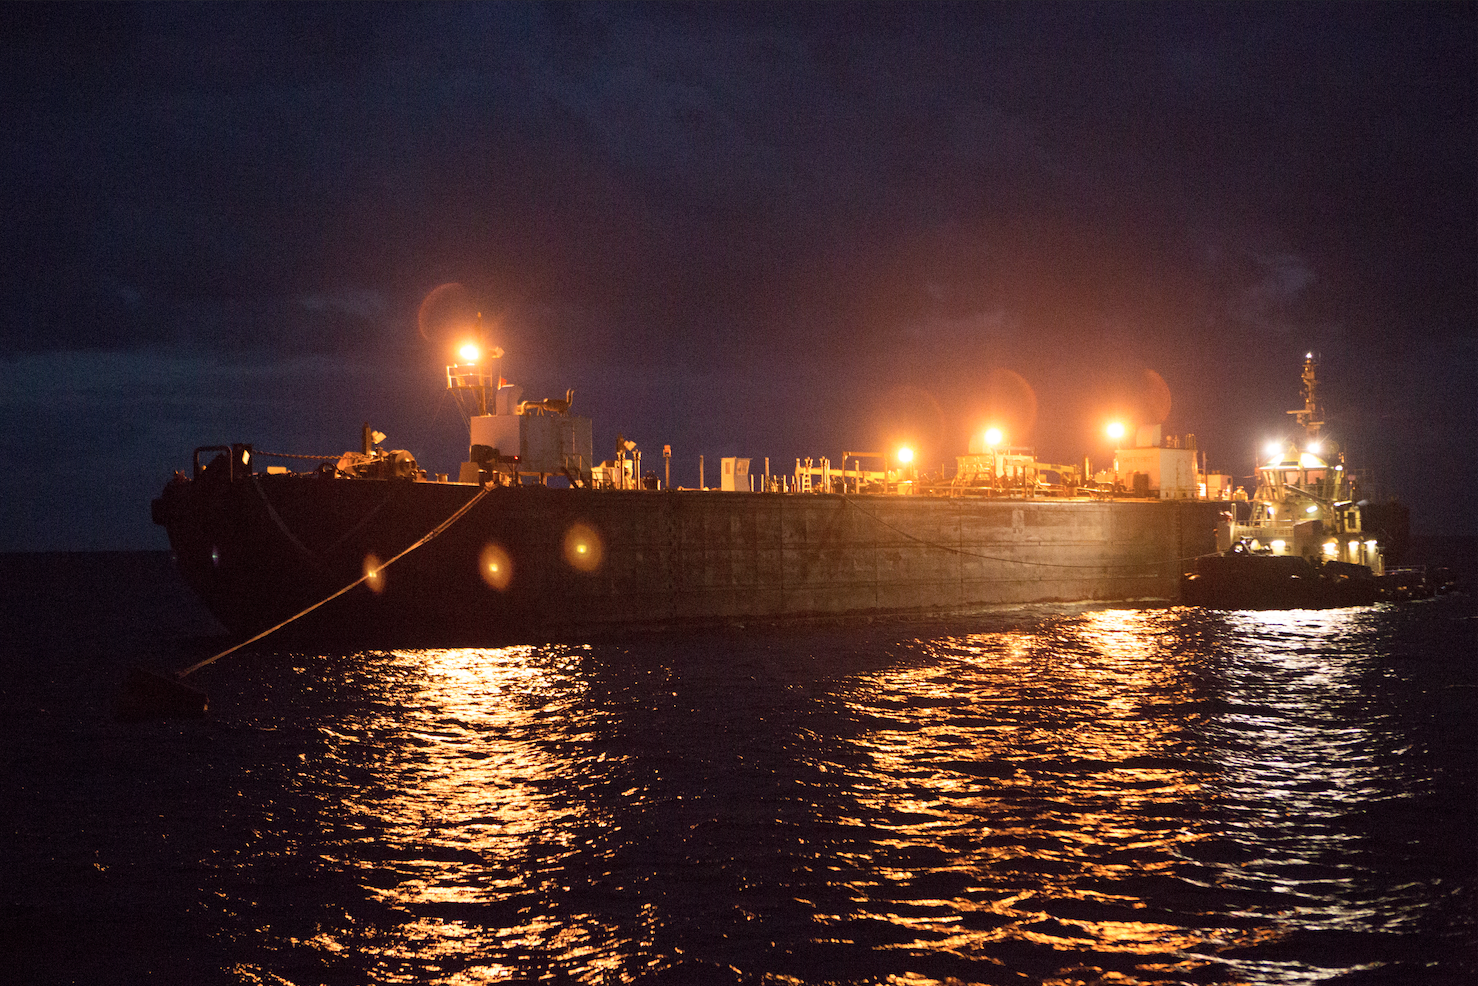 One of the huge oil tankers parked in Eustatia's harbor.